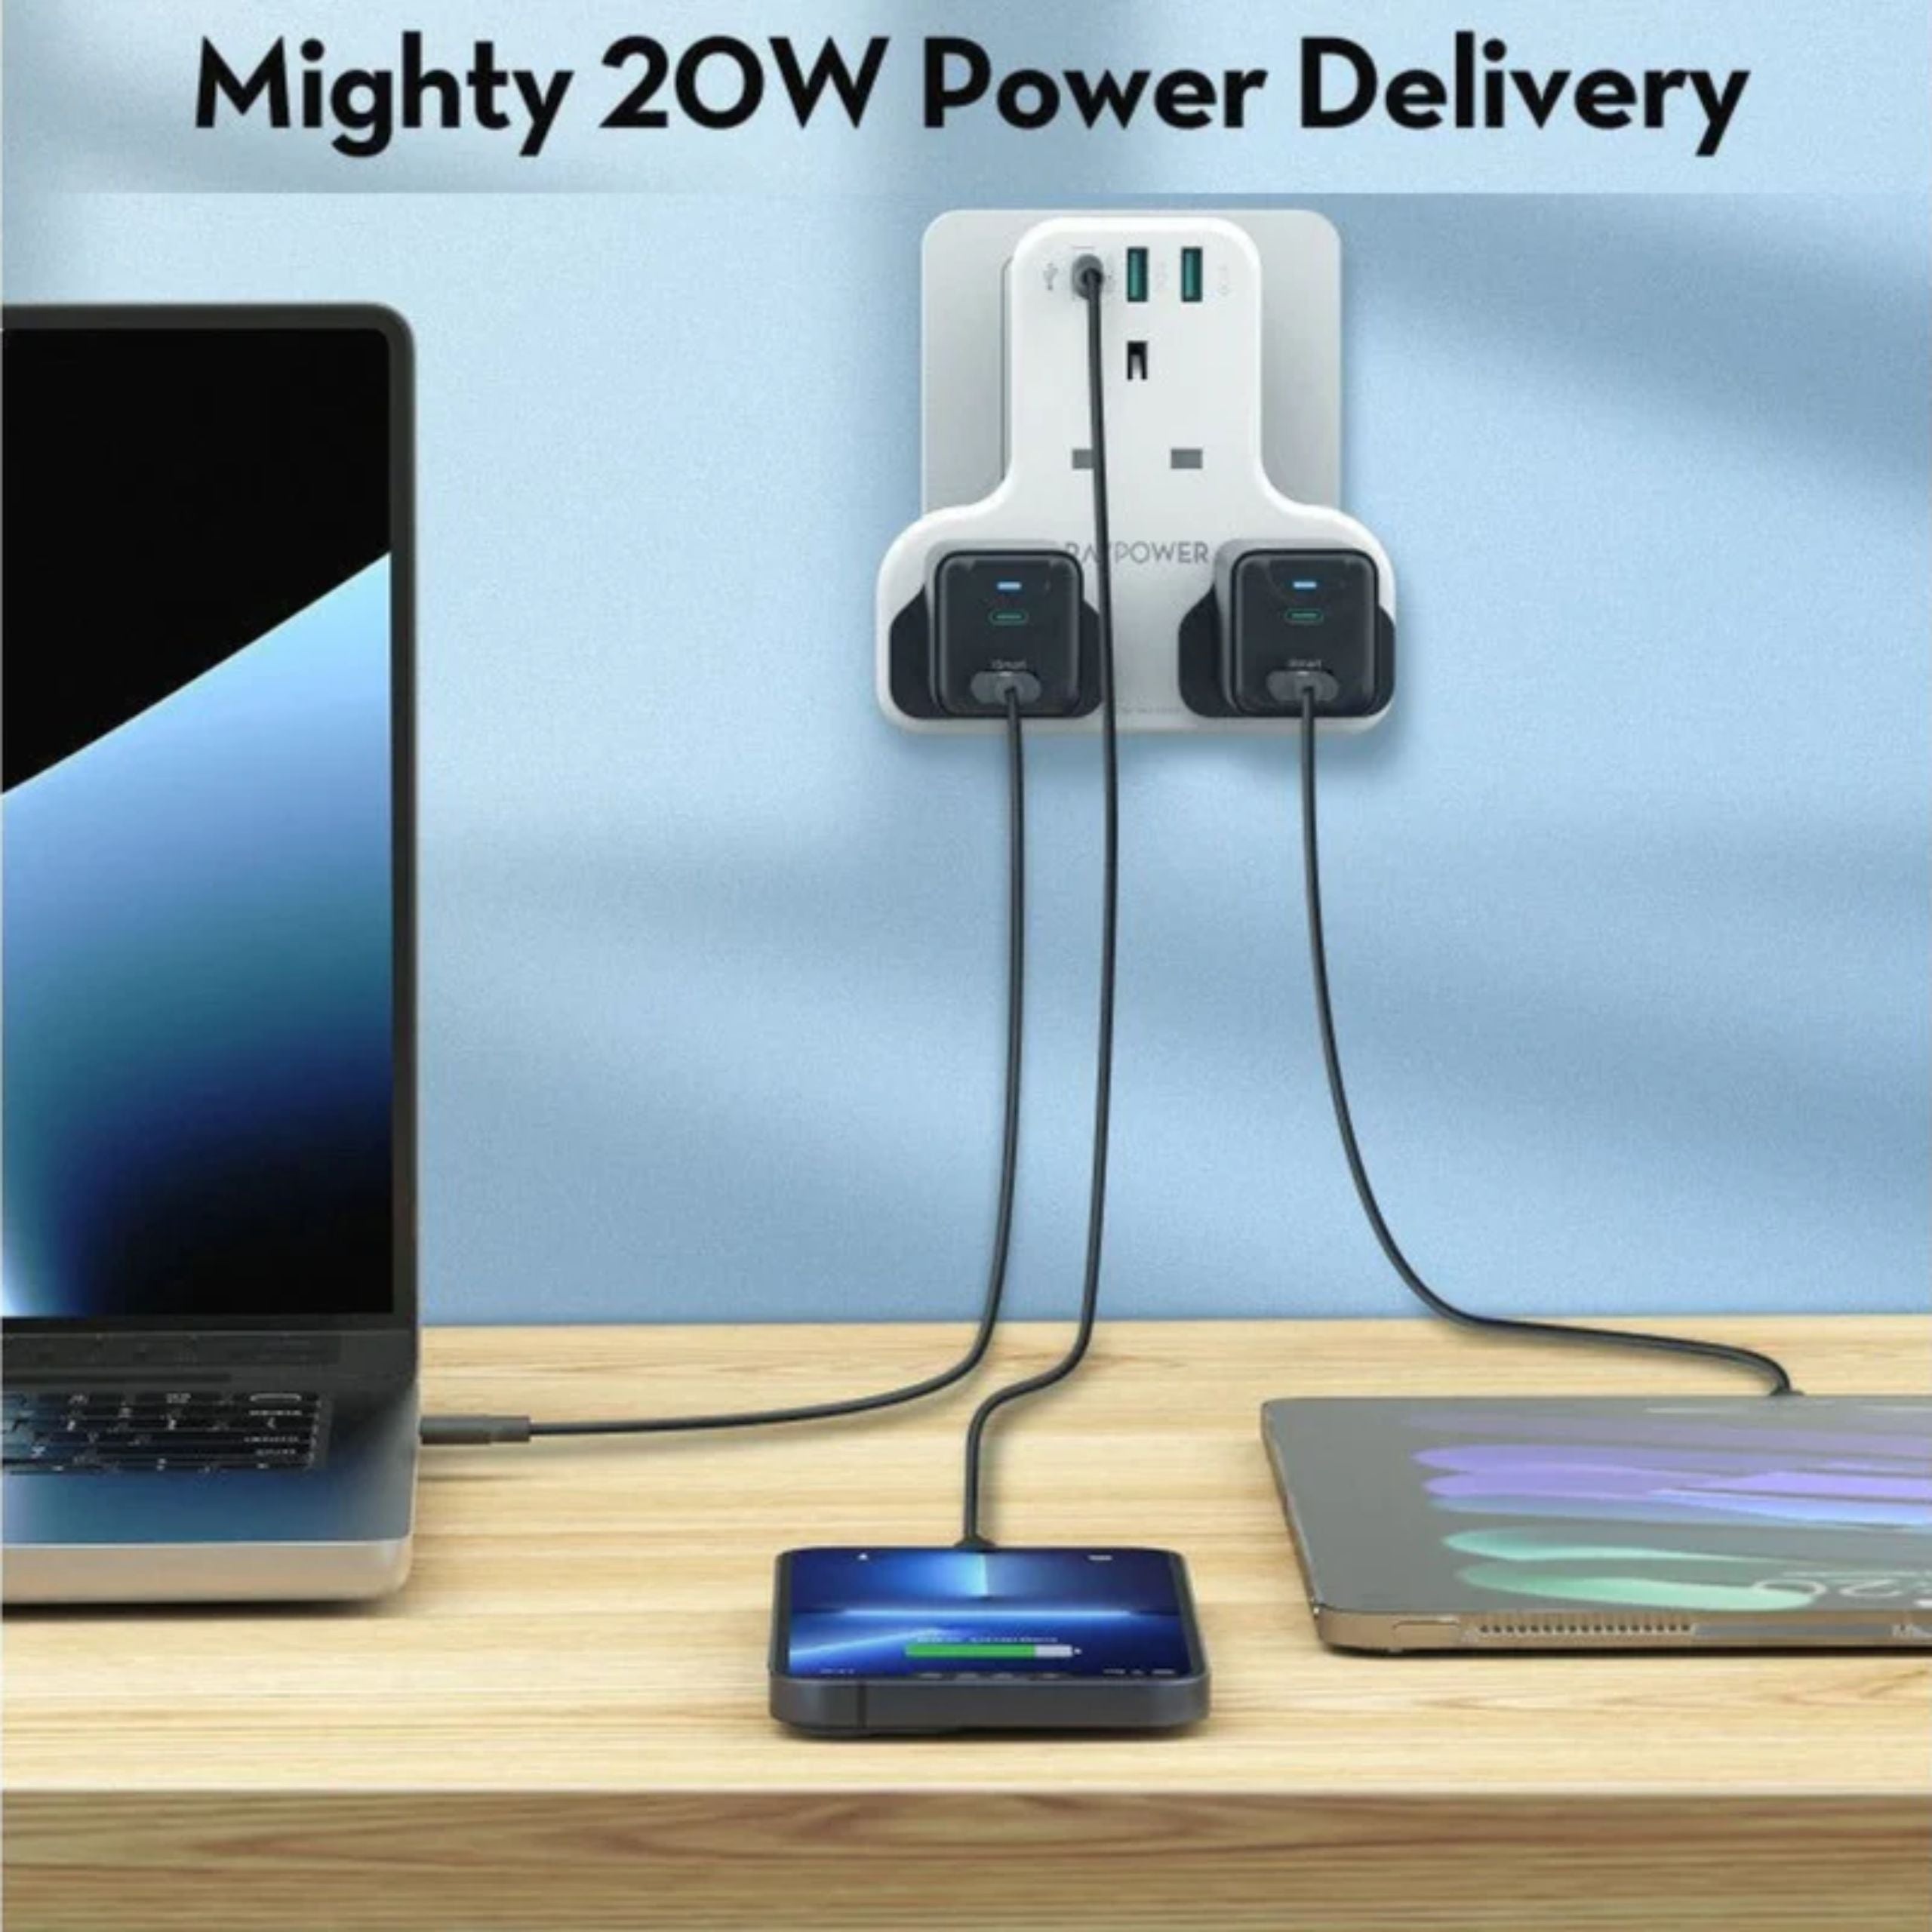 Ravpower 20W Wall Charger with 3 AC Port - White